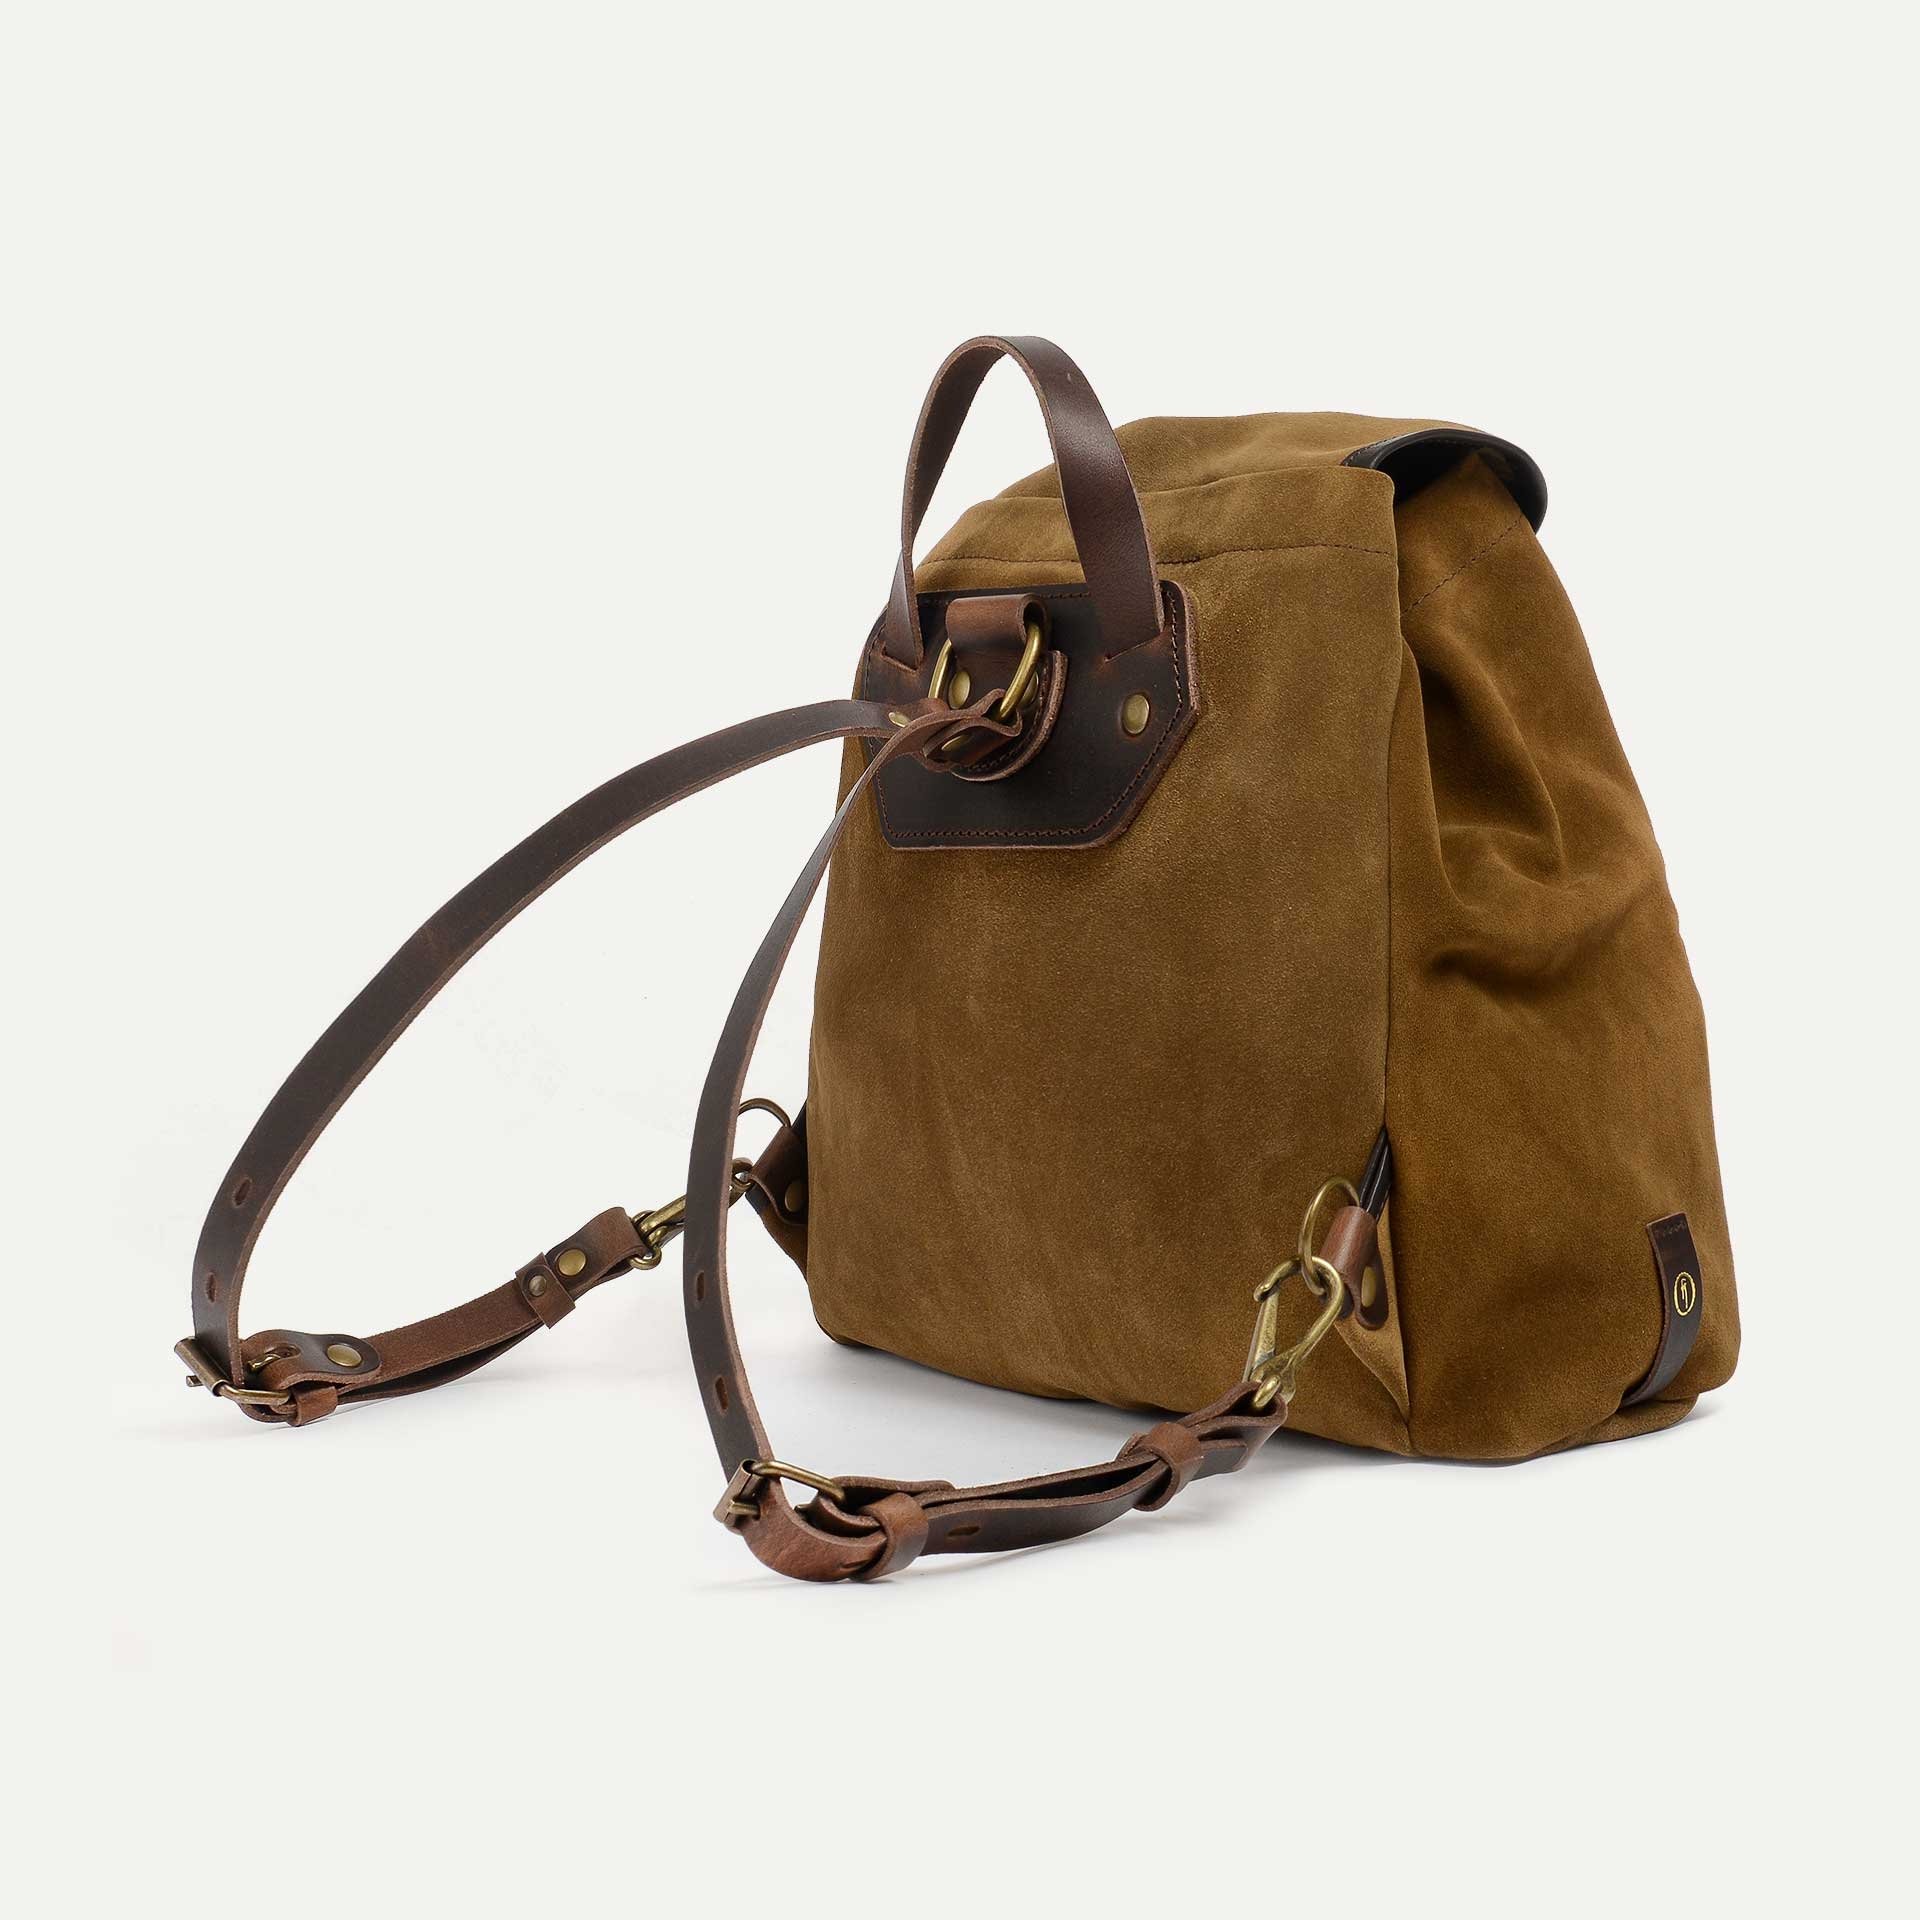 Camp S backpack / Suede - Tabacco (image n°2)